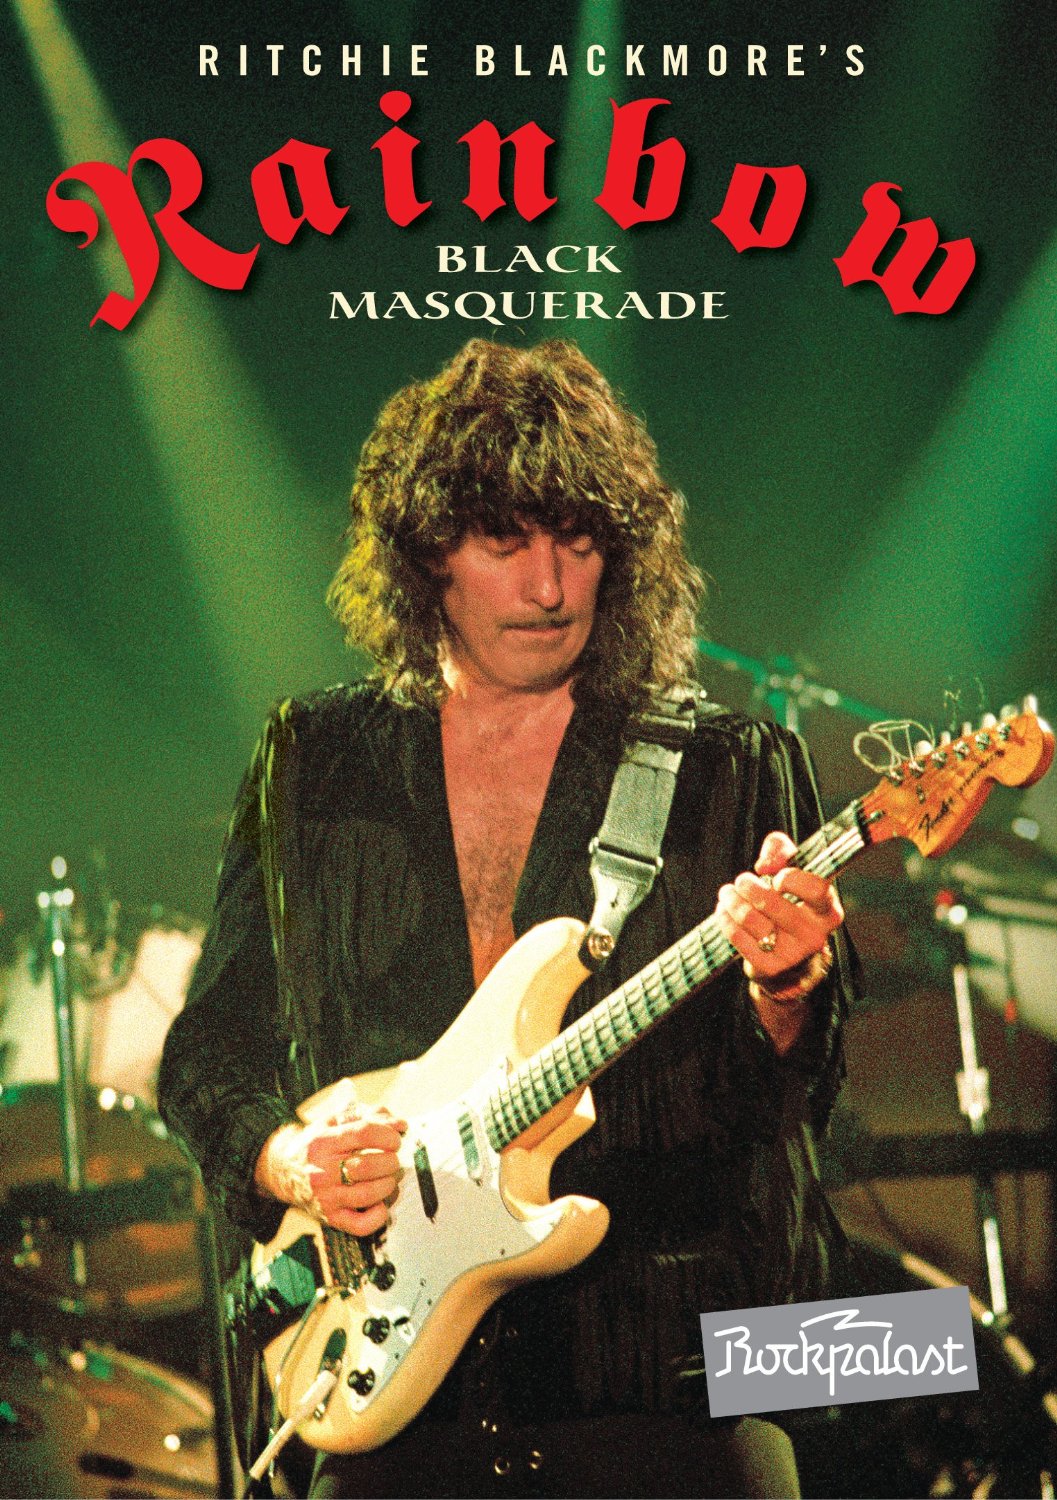 Rainbow Black Masquerade – Rare 1995 Television Concert from Ritchie Blackmore and Company!